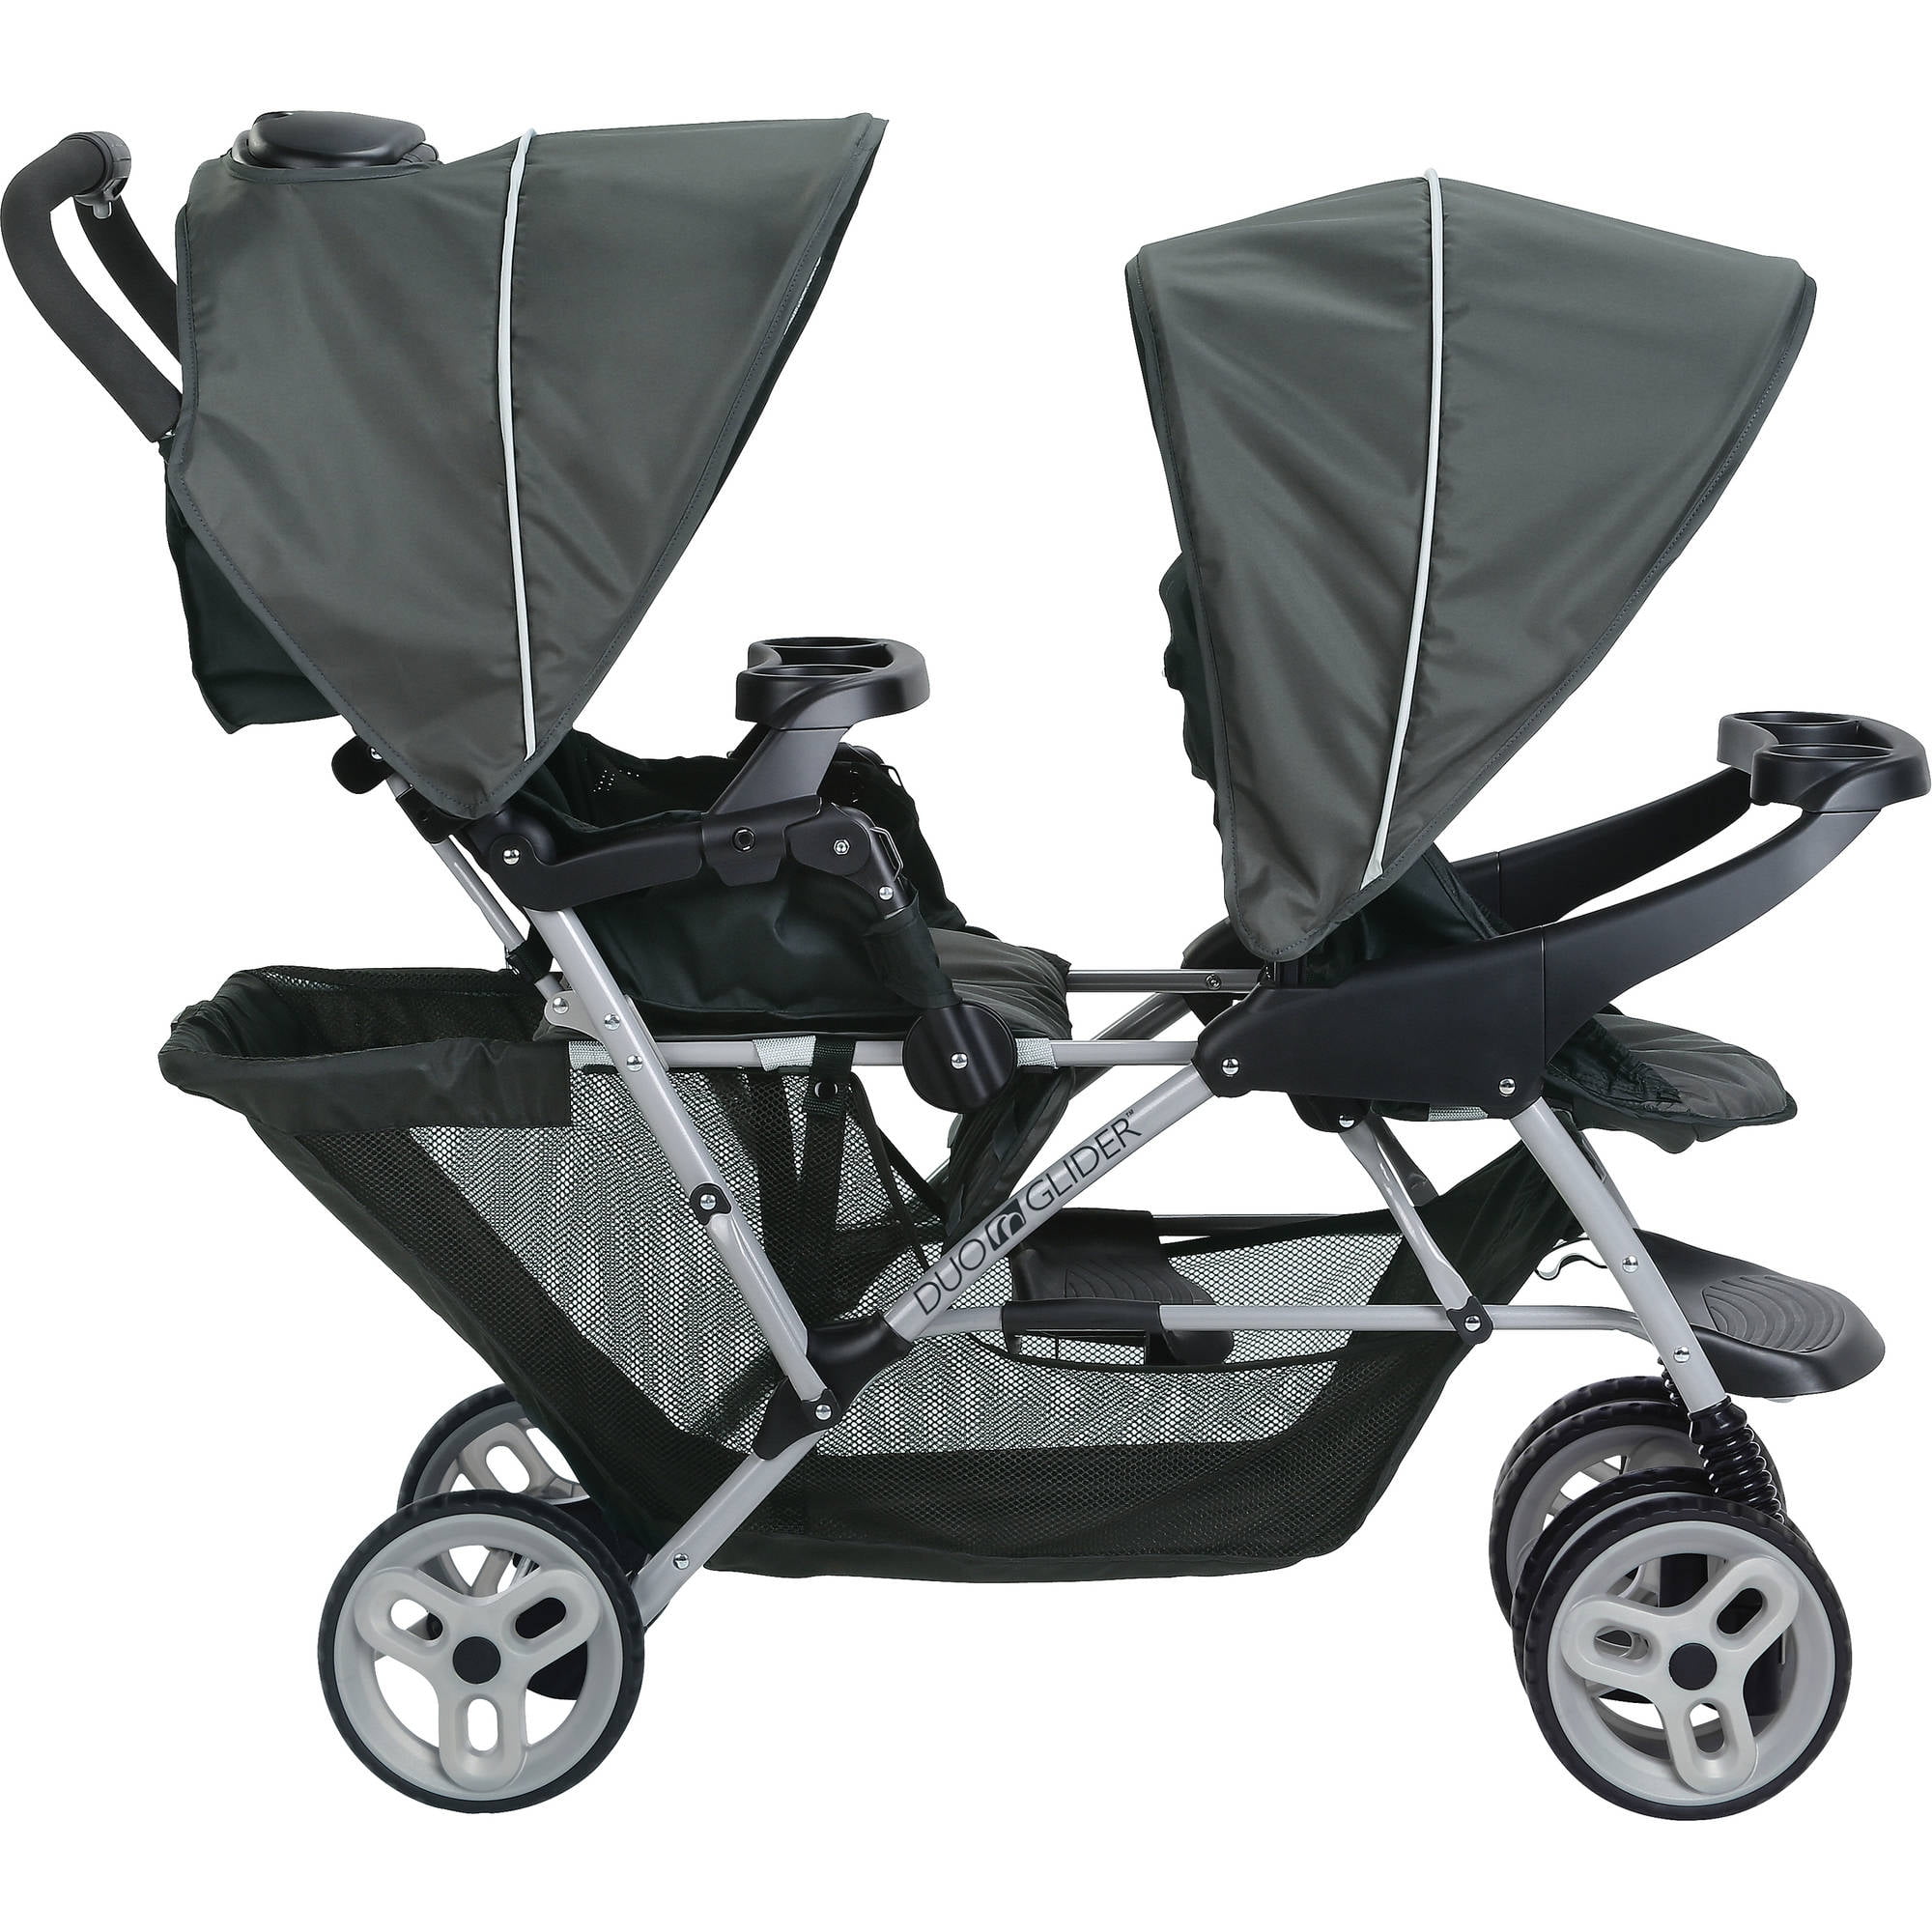 graco double stroller weight